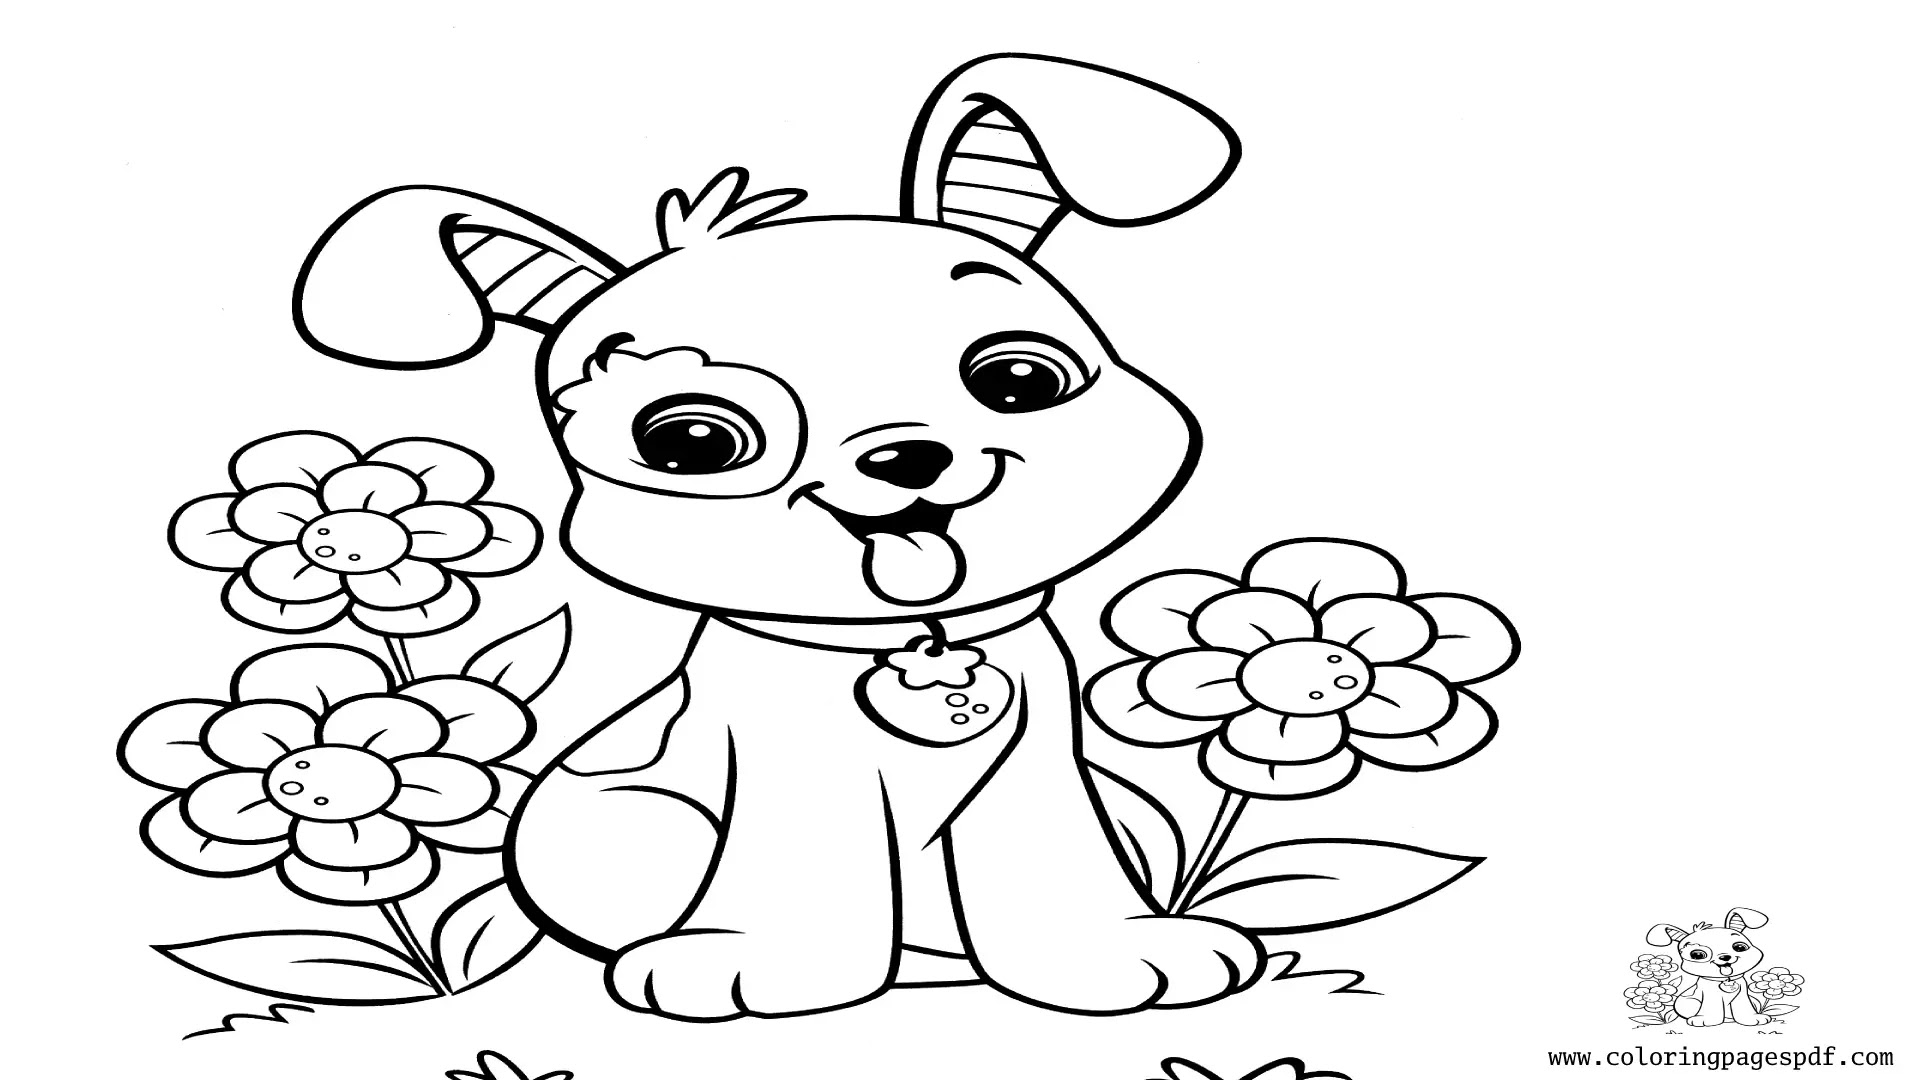 Coloring Pages Of A Small Puppy With Flowers